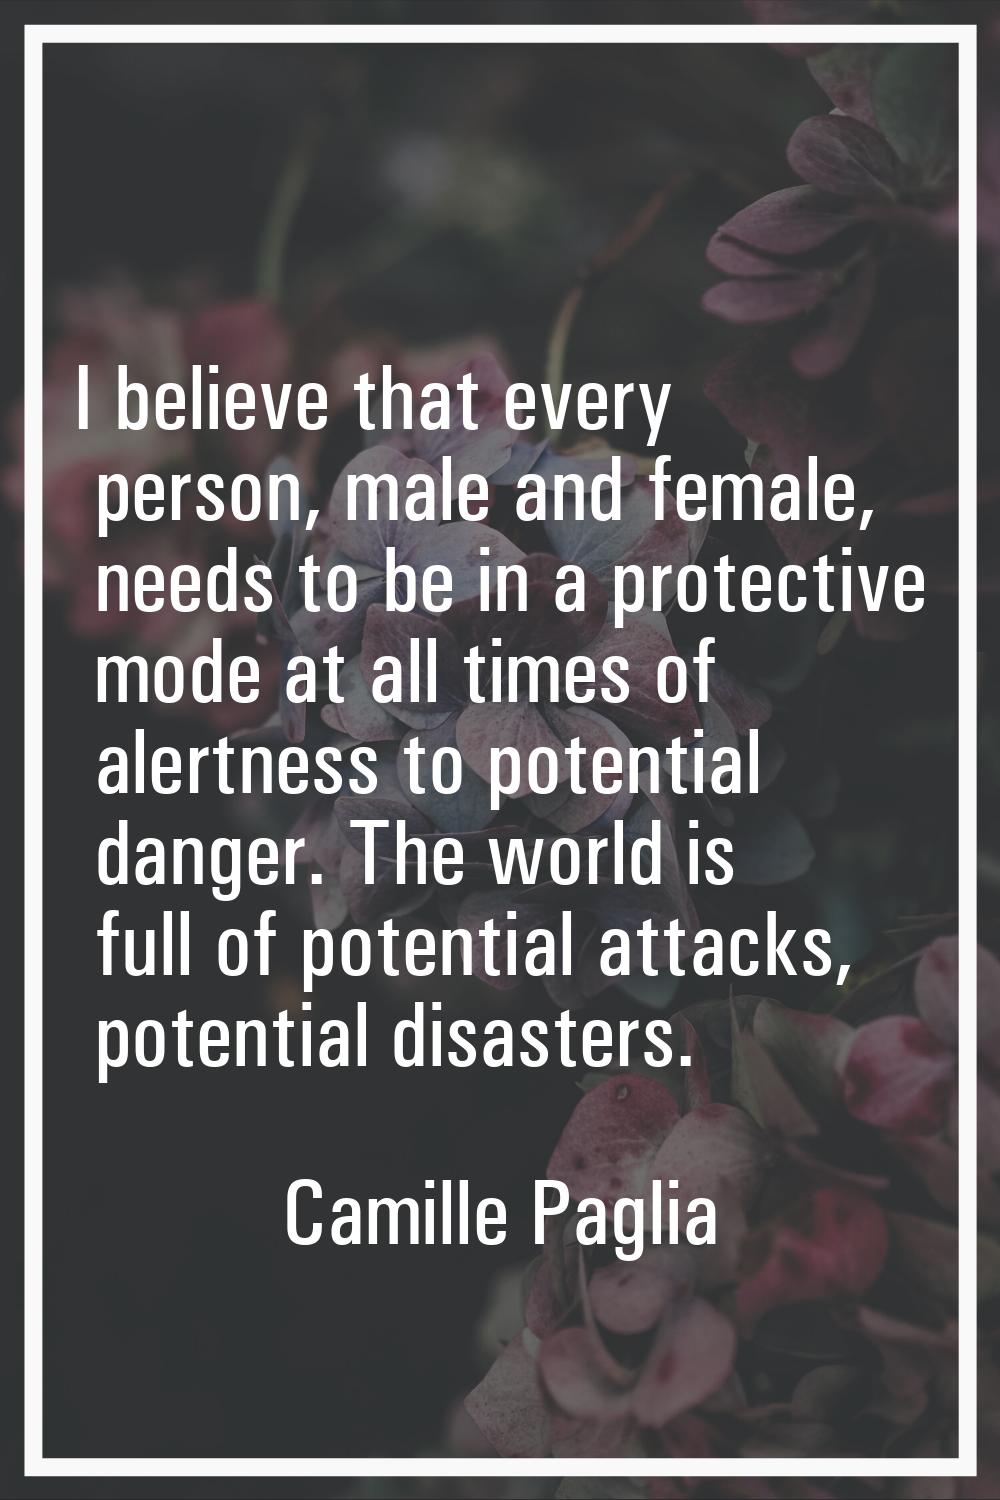 I believe that every person, male and female, needs to be in a protective mode at all times of aler